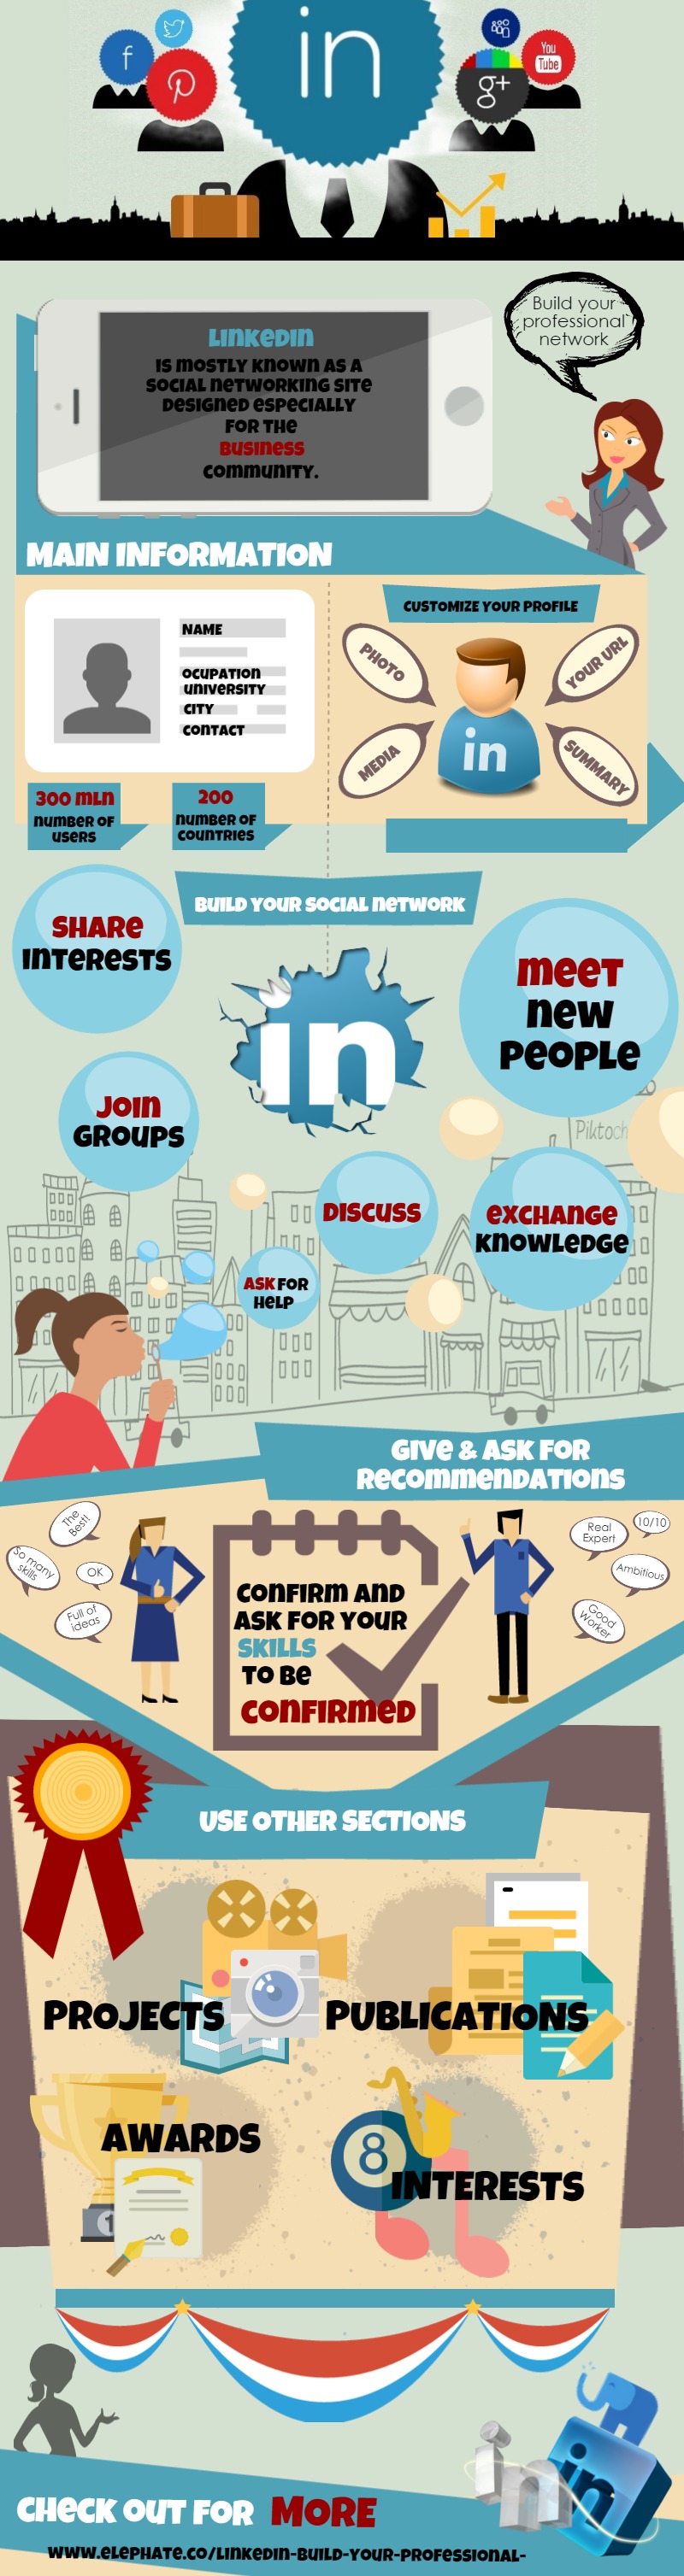 linkedin - build your professional network